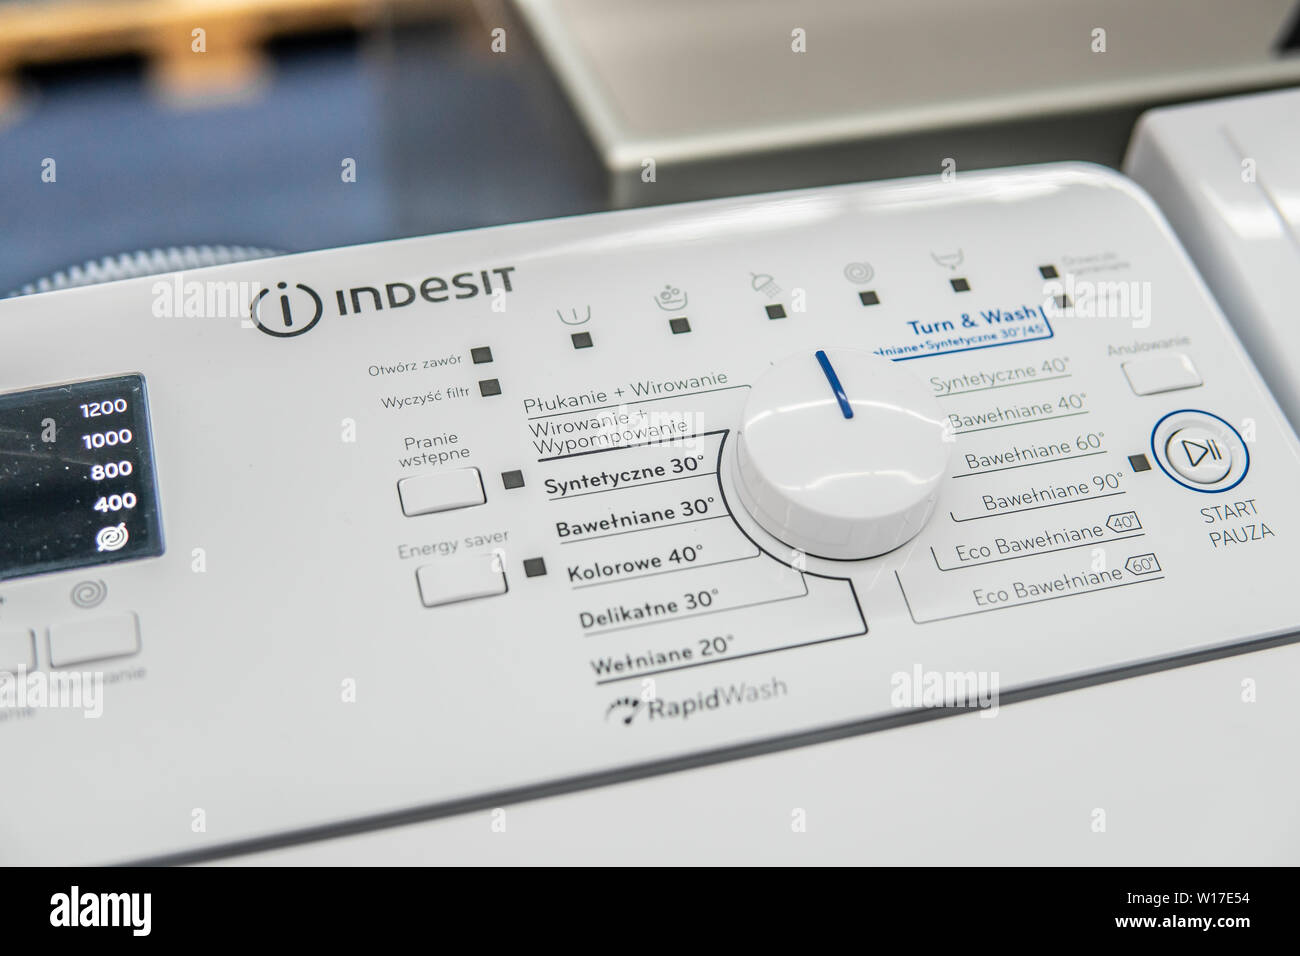 Indesit High Resolution Stock Photography and Images - Alamy